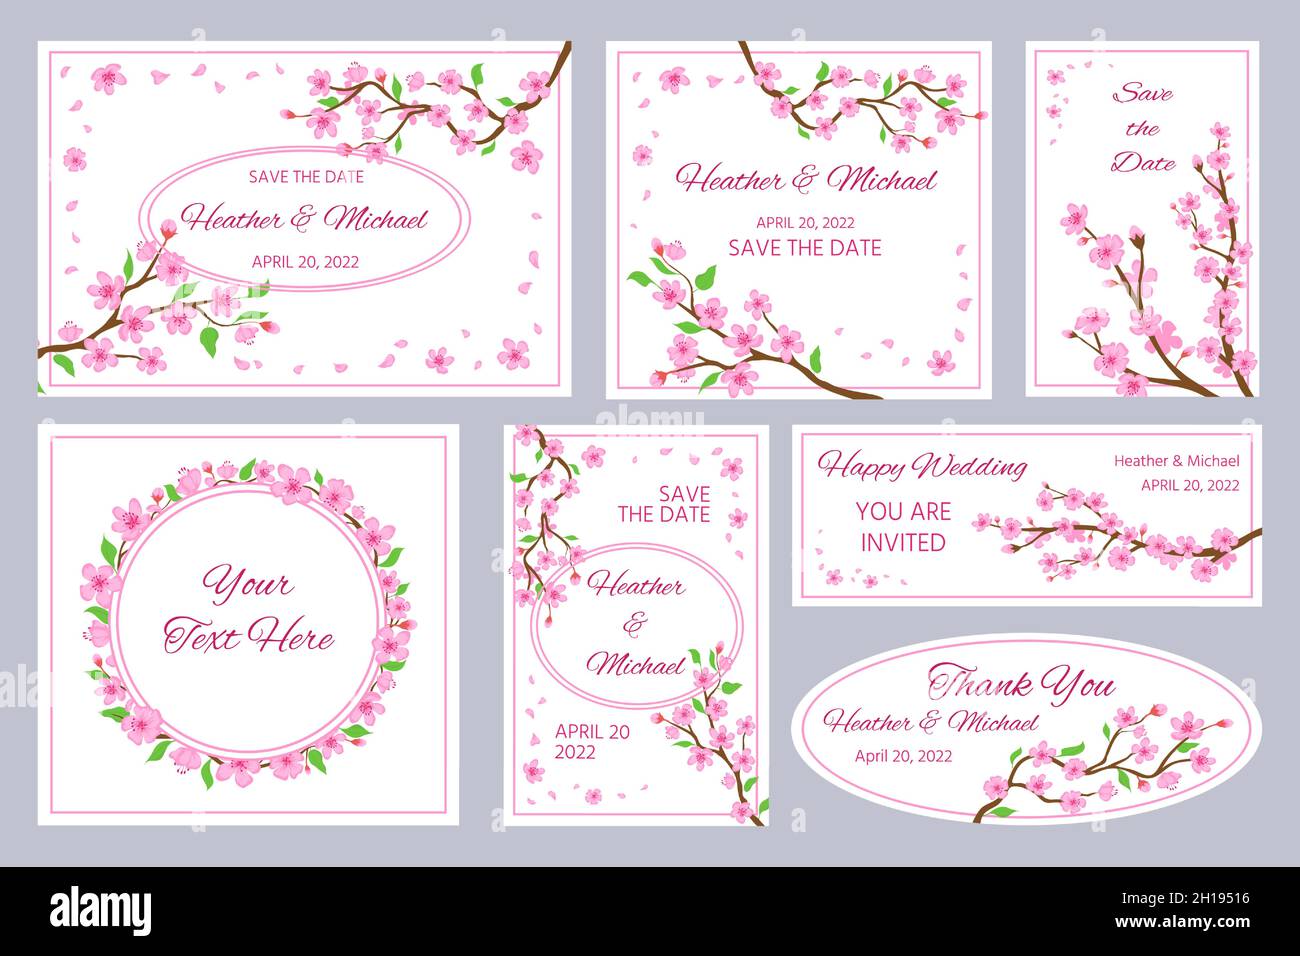 Wedding invitations and greeting cards with sakura blossom flowers. Japan cherry tree branches and pink petals frames and borders vector set Stock Vector